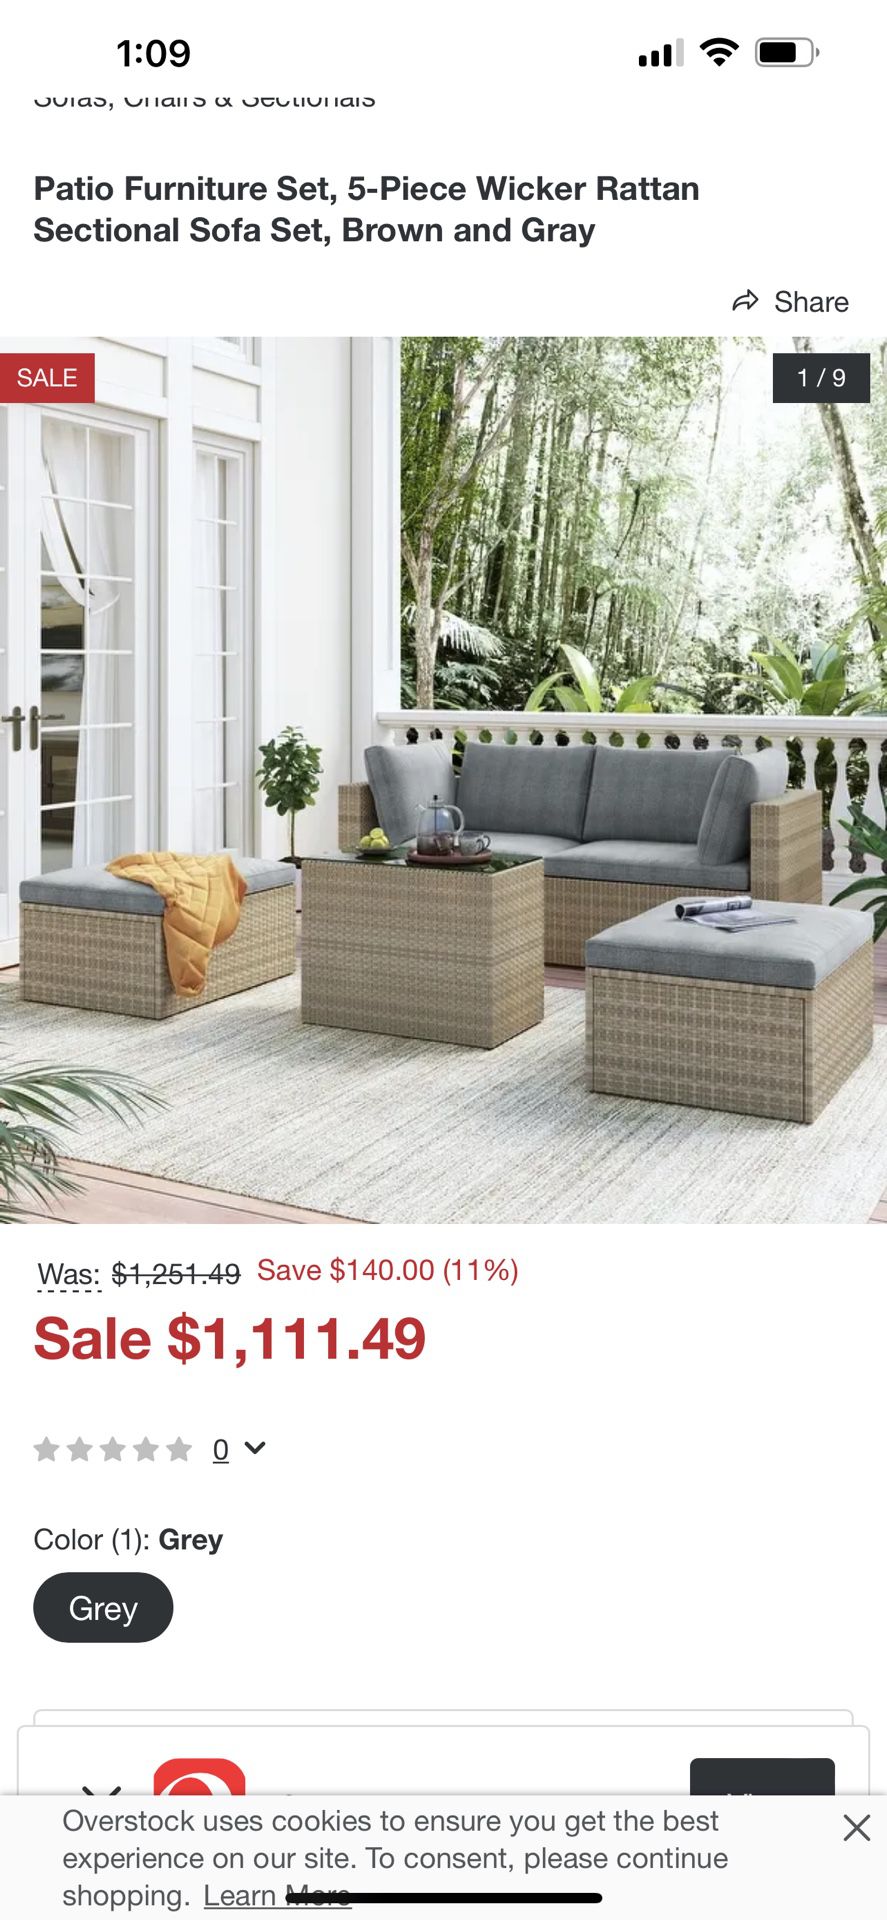 Patio Furniture Set, 5-Piece Wicker Rattan Sectional Sofa Set, Brown and Gray